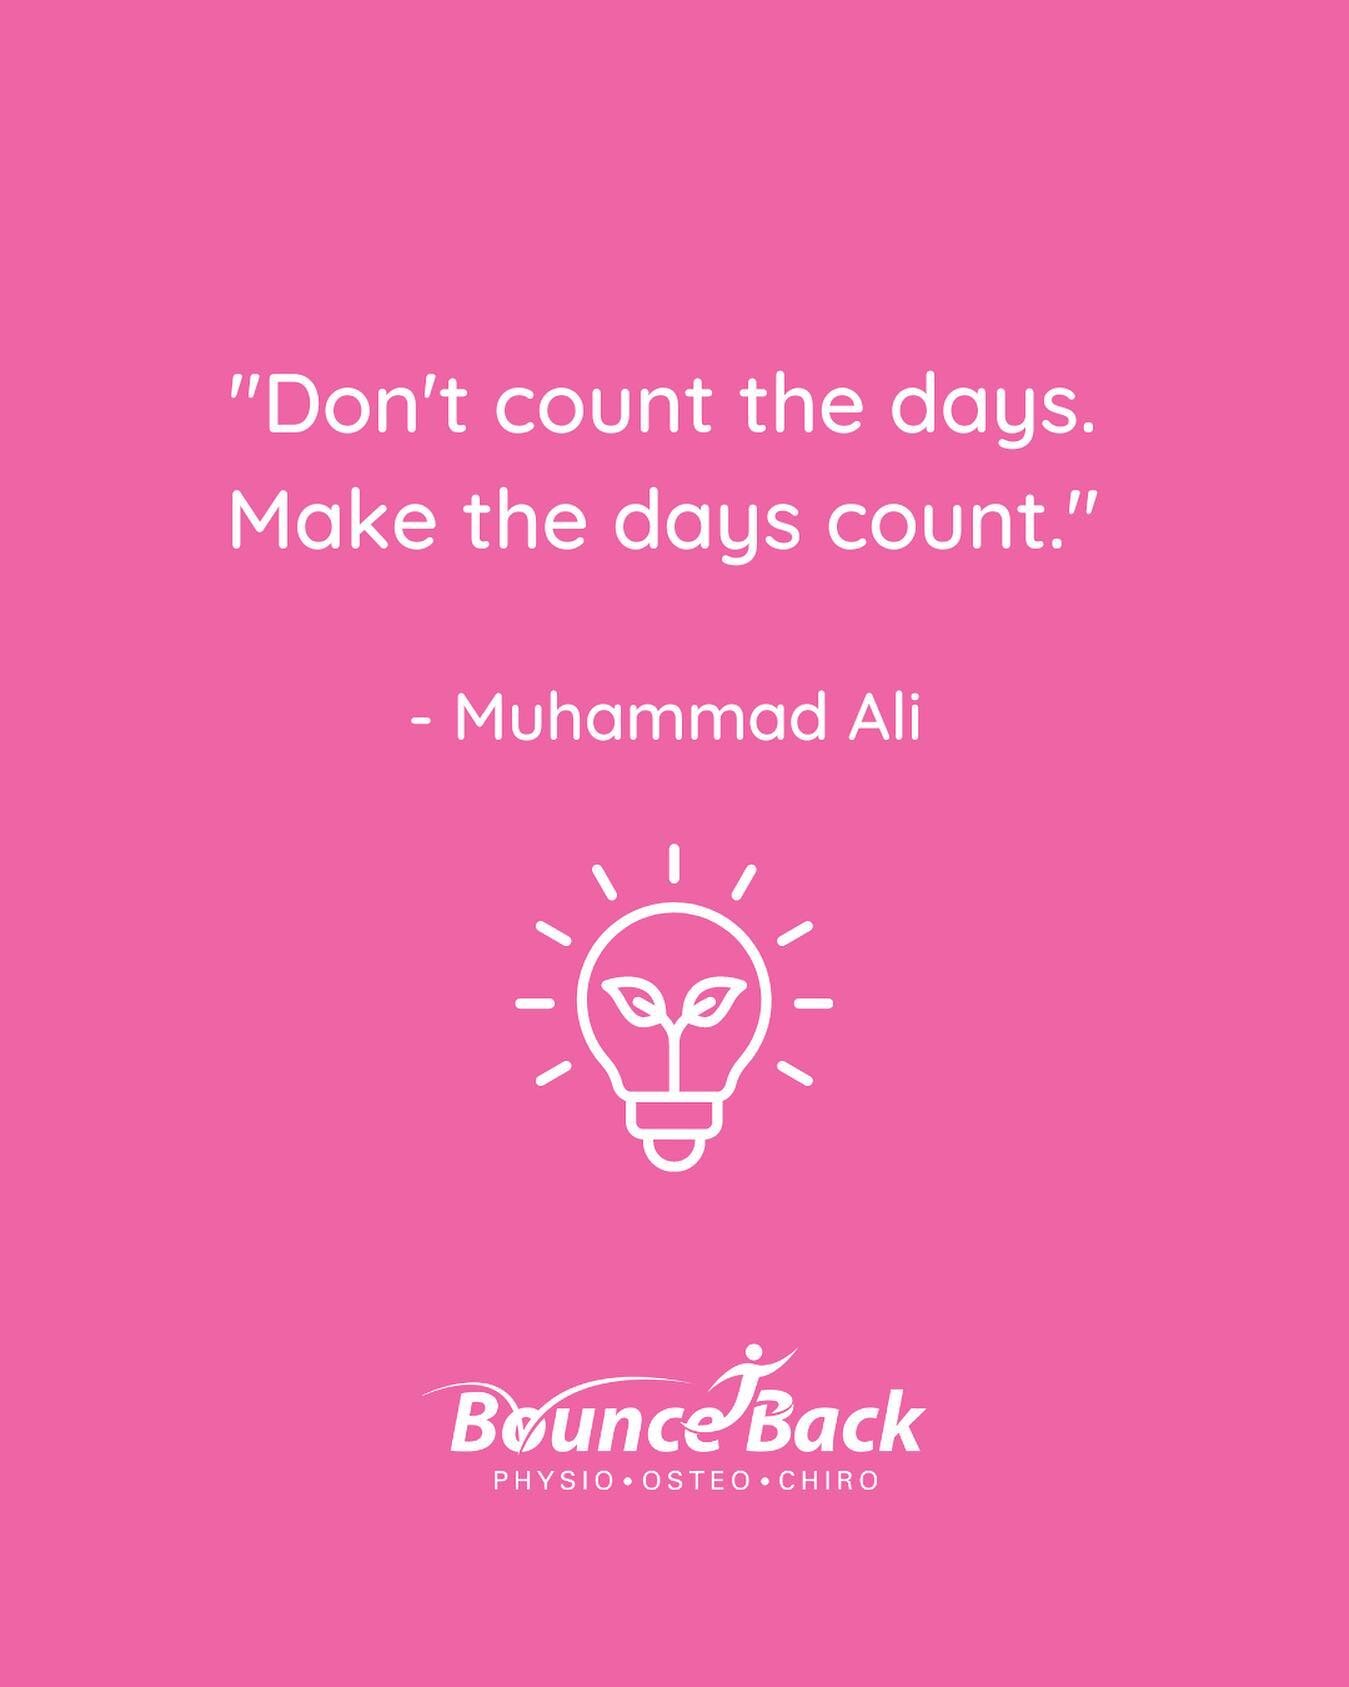 Here&rsquo;s some Monday motivation for you all! We hope you have a great week ahead ☺️

#bounceback2health